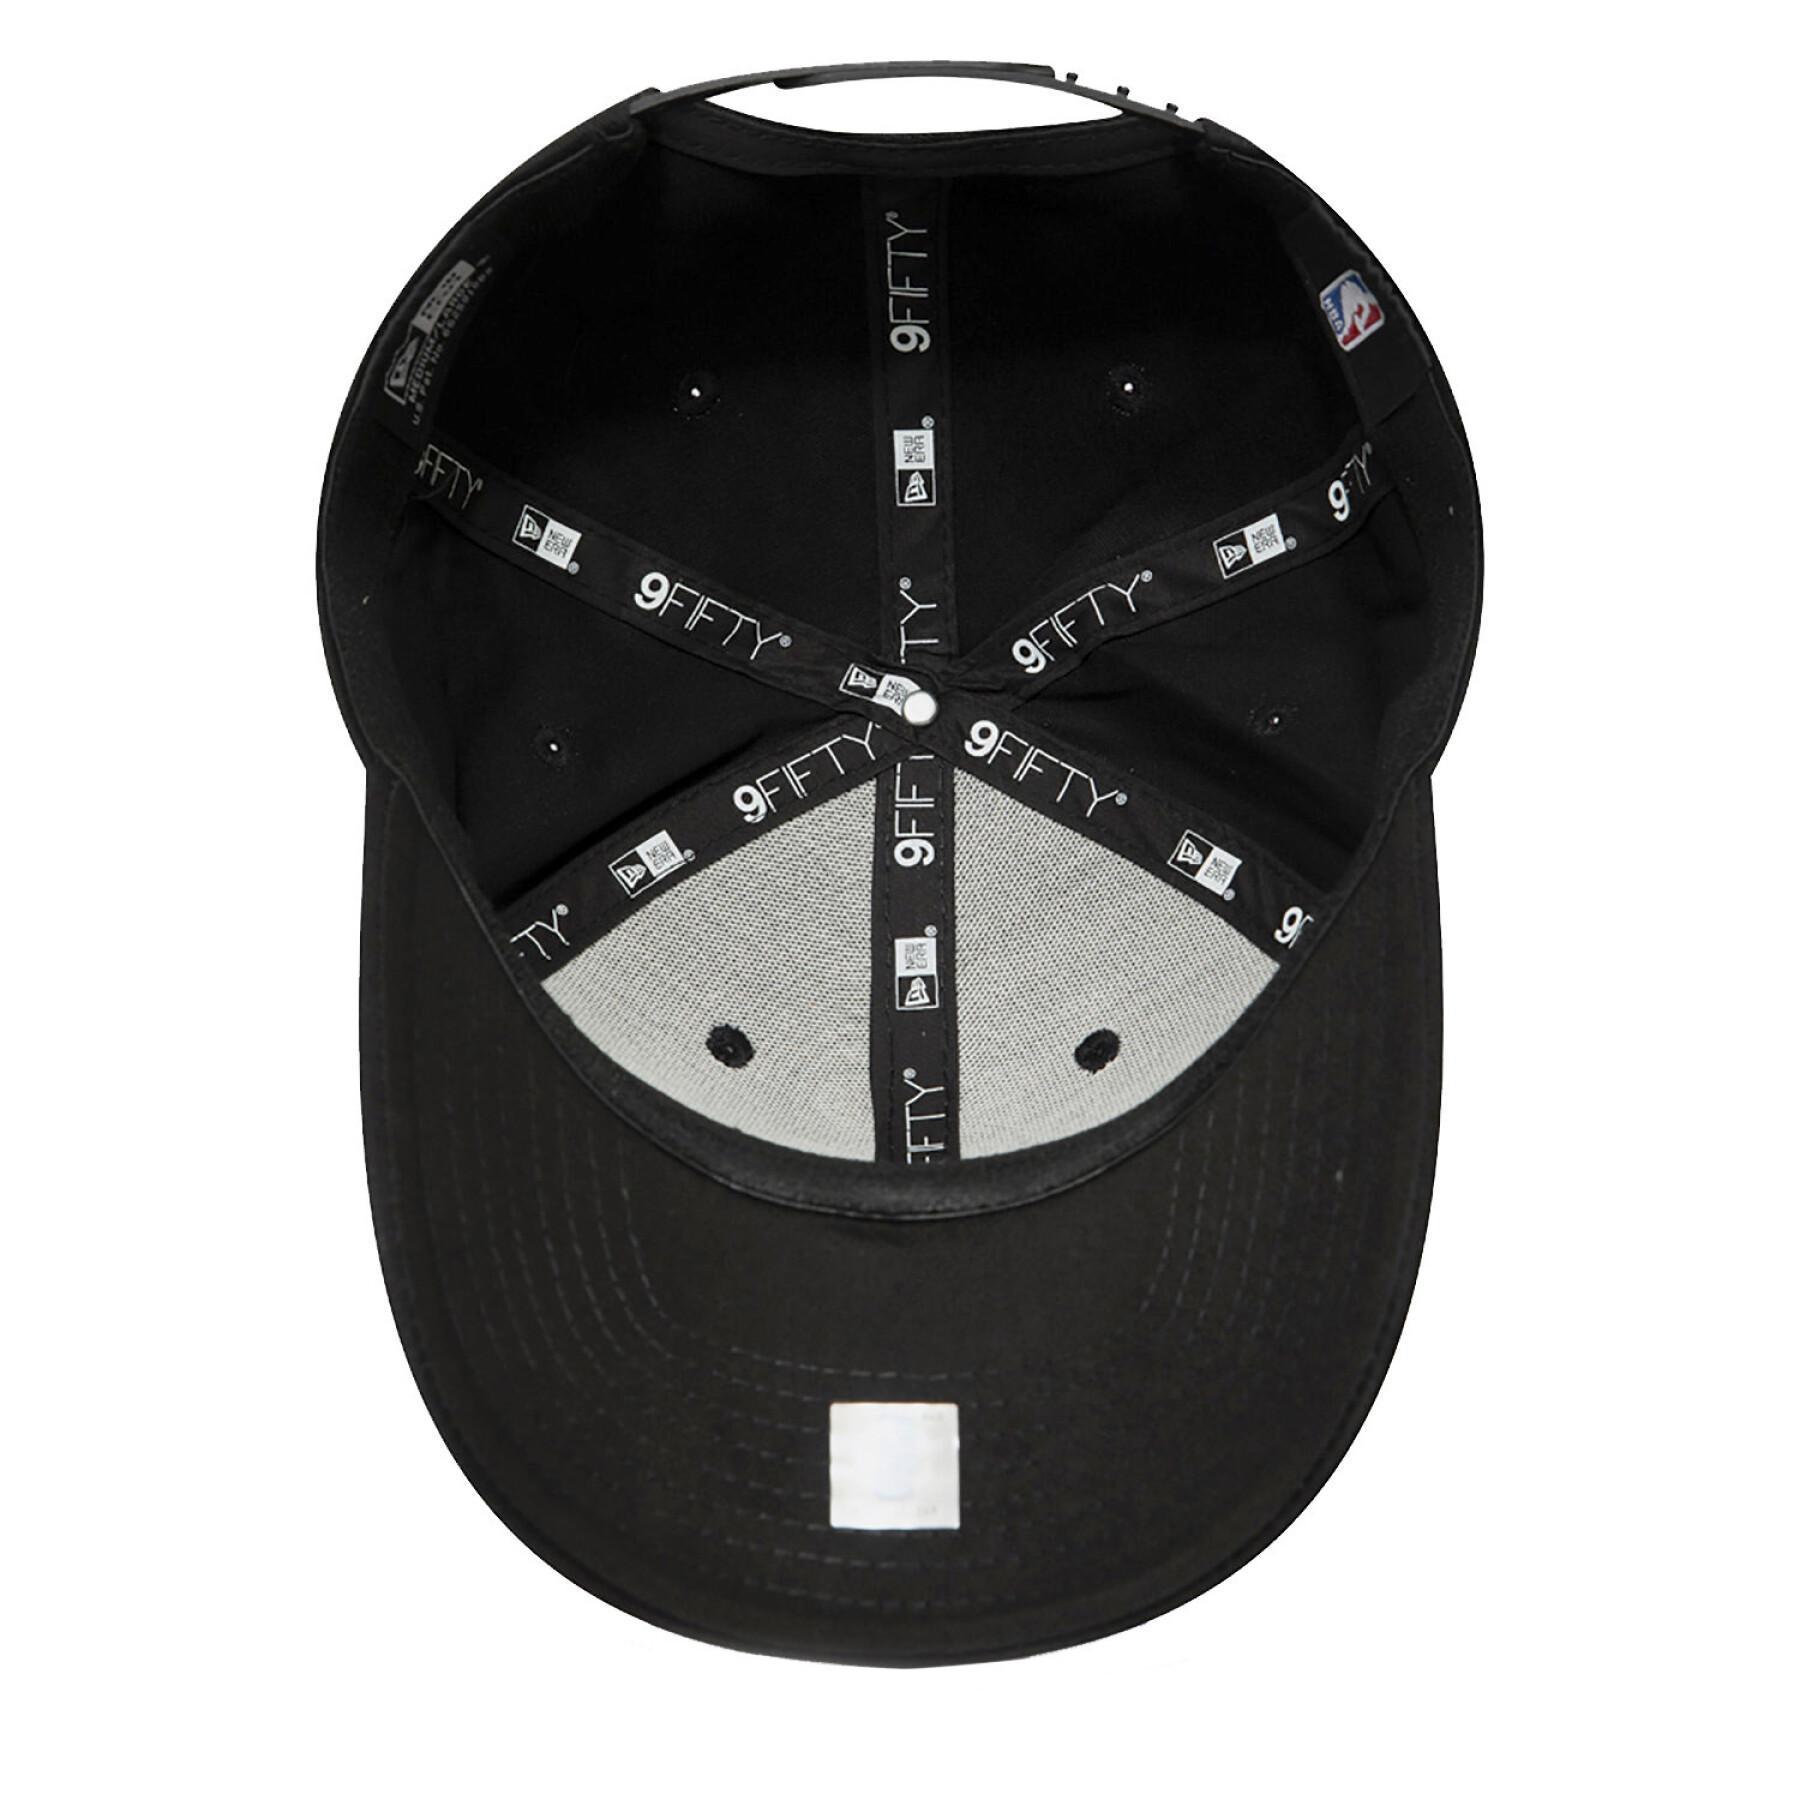 New York Yankees keps 9fifty